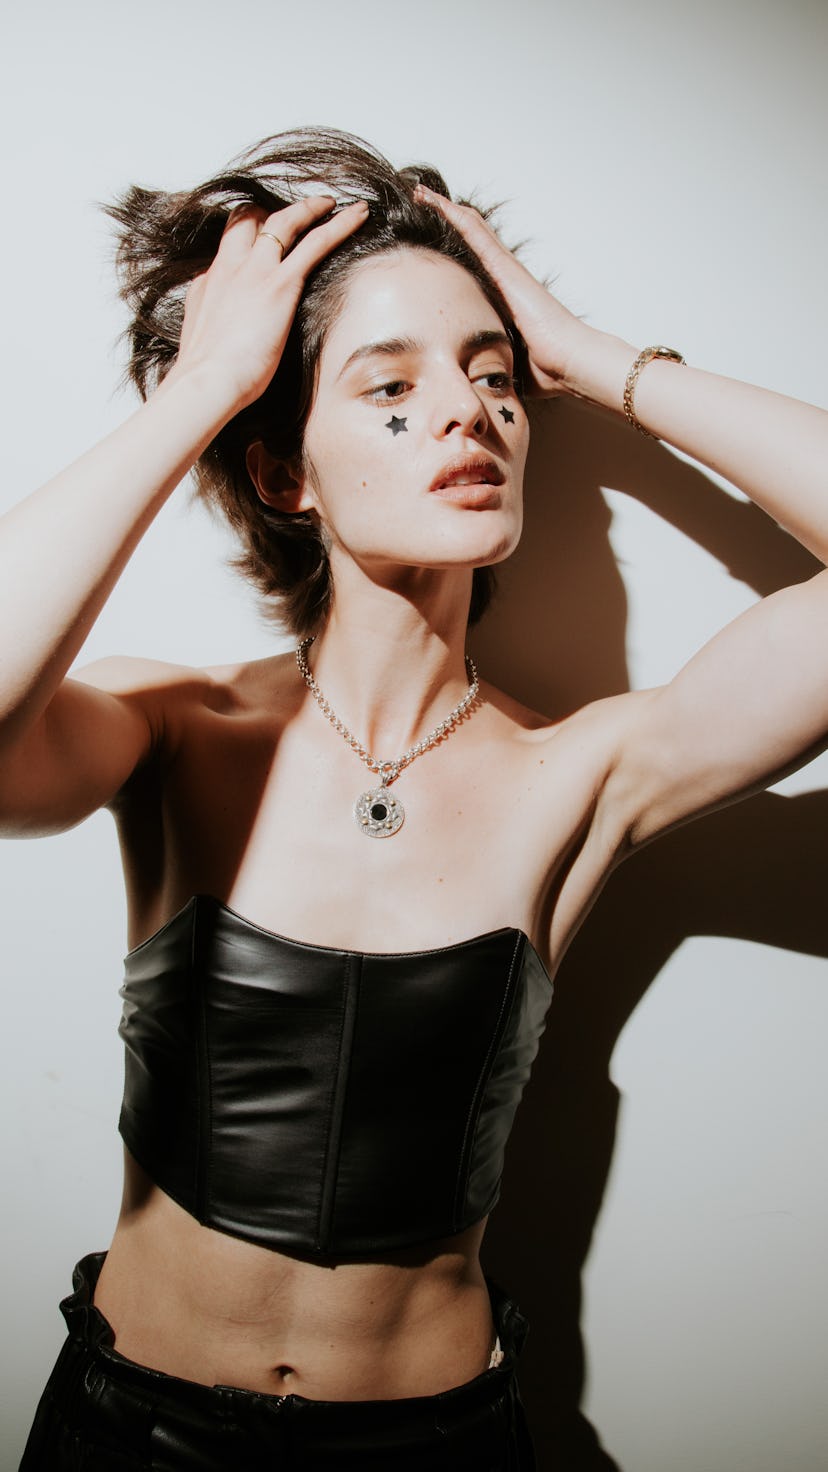 A model with stick on stars under her eyes in a black outfit and flashy necklace